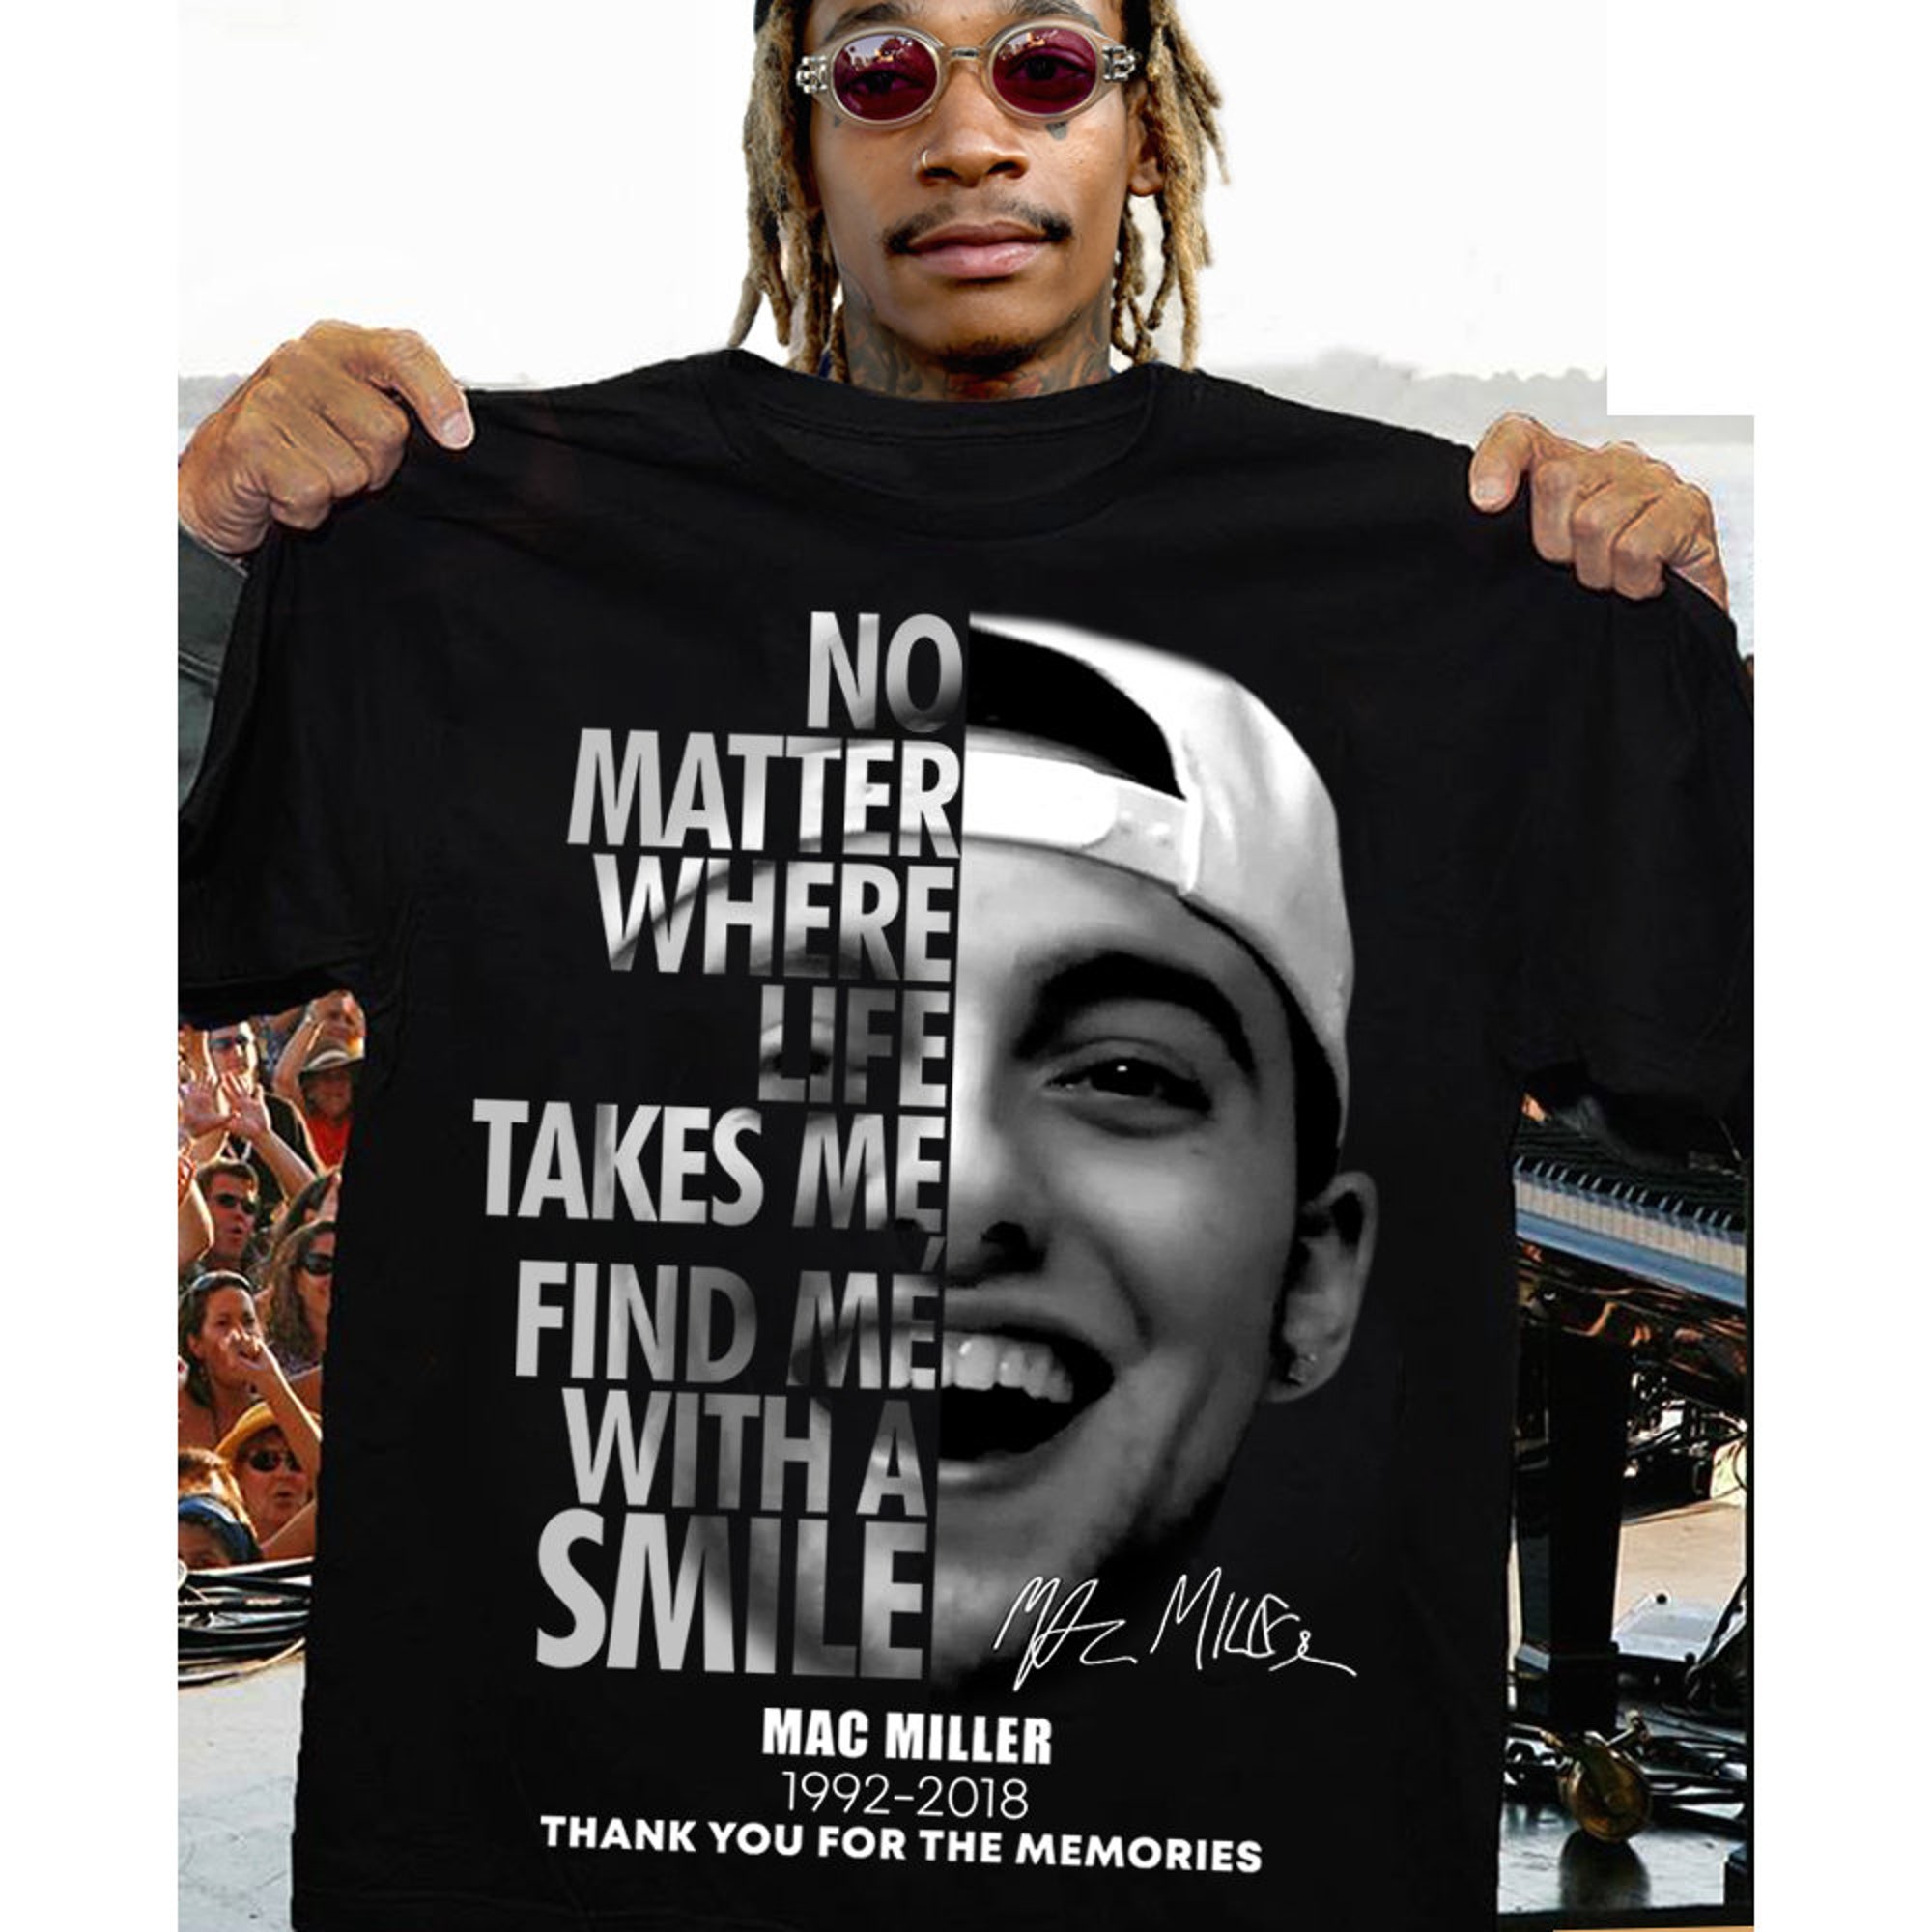 Discover macmiller Shirt, No Matter Where Life Takes Me Find Me With A Smile T-shirt